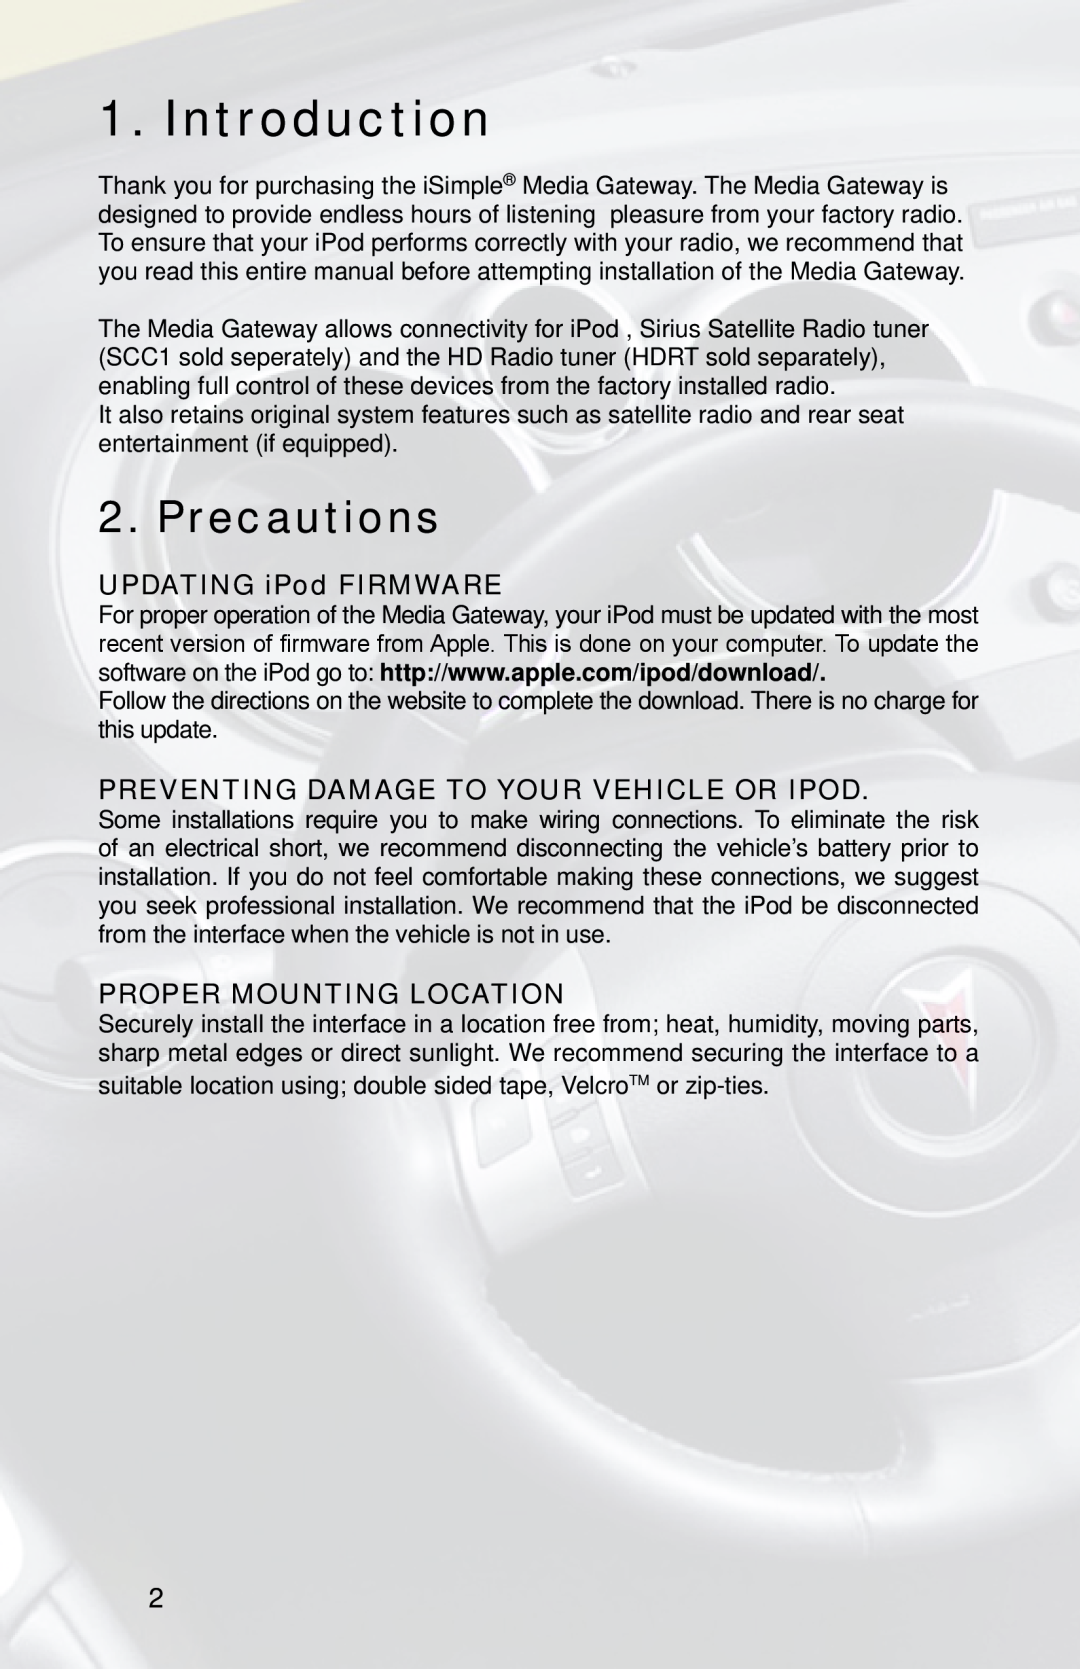 iSimple PGHGM2, PXAMG Introduction, Precautions, UPDATING iPod FIRMWARE, PREVENTING DAMAGE TO YOUR VEHICLE OR iPod 